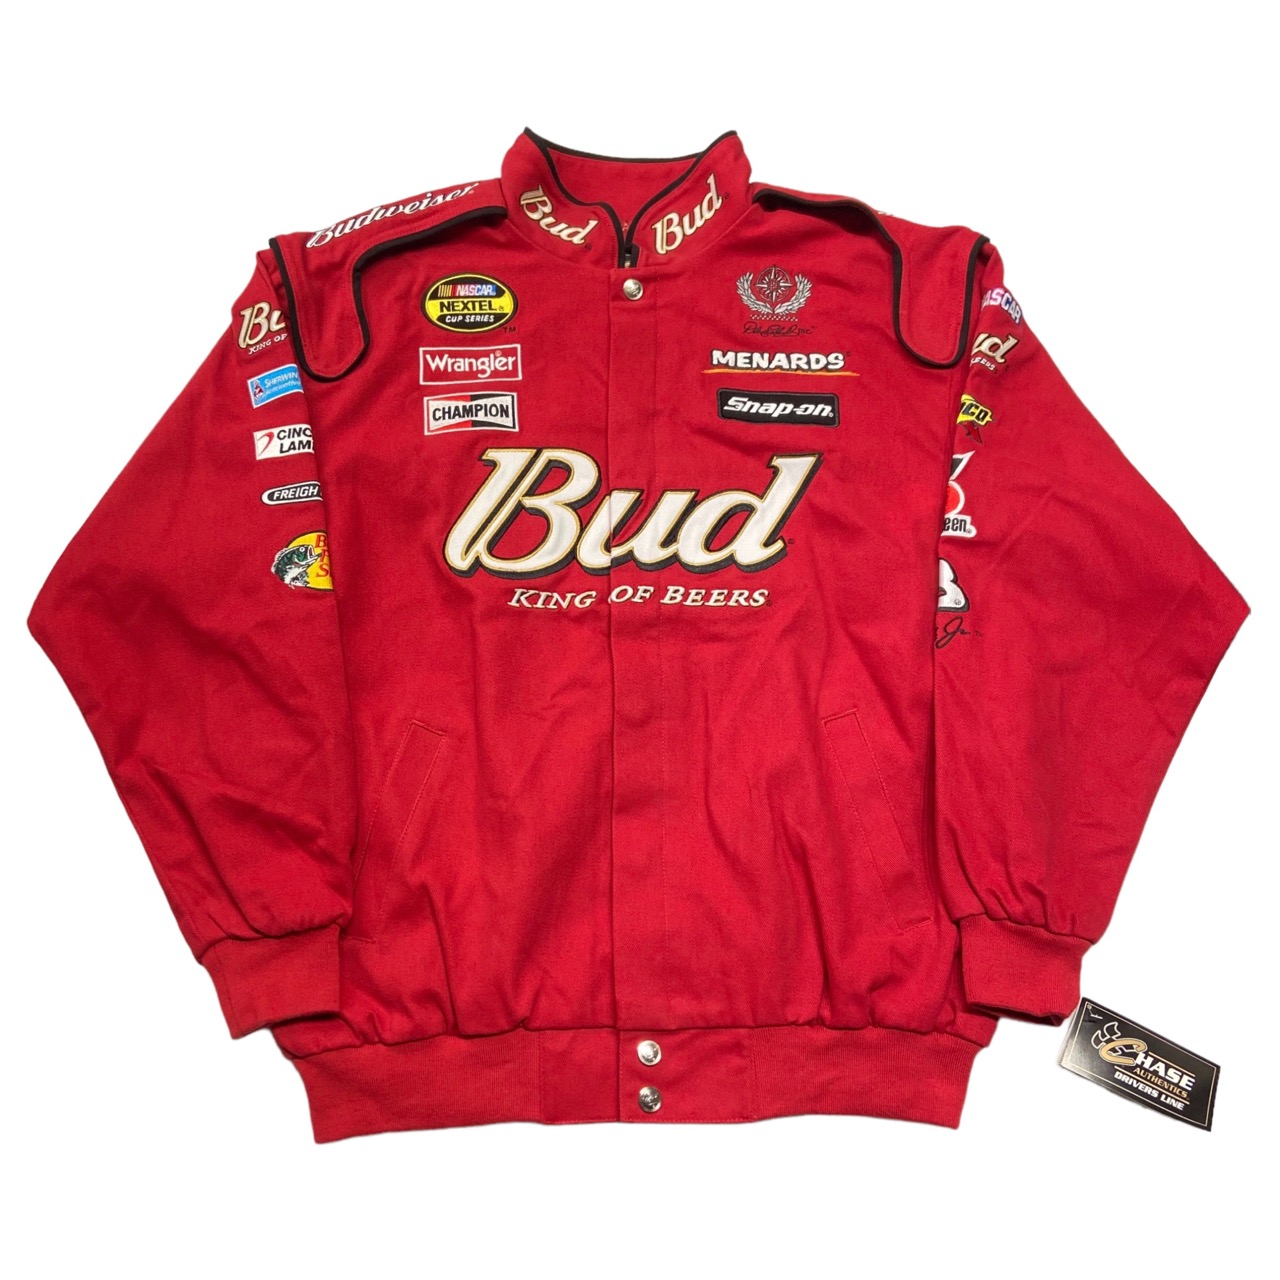 DEAD STOCK】CHASE AUTHENTICS NASCAR Racing Jacket “Budweiser”(SIZE 